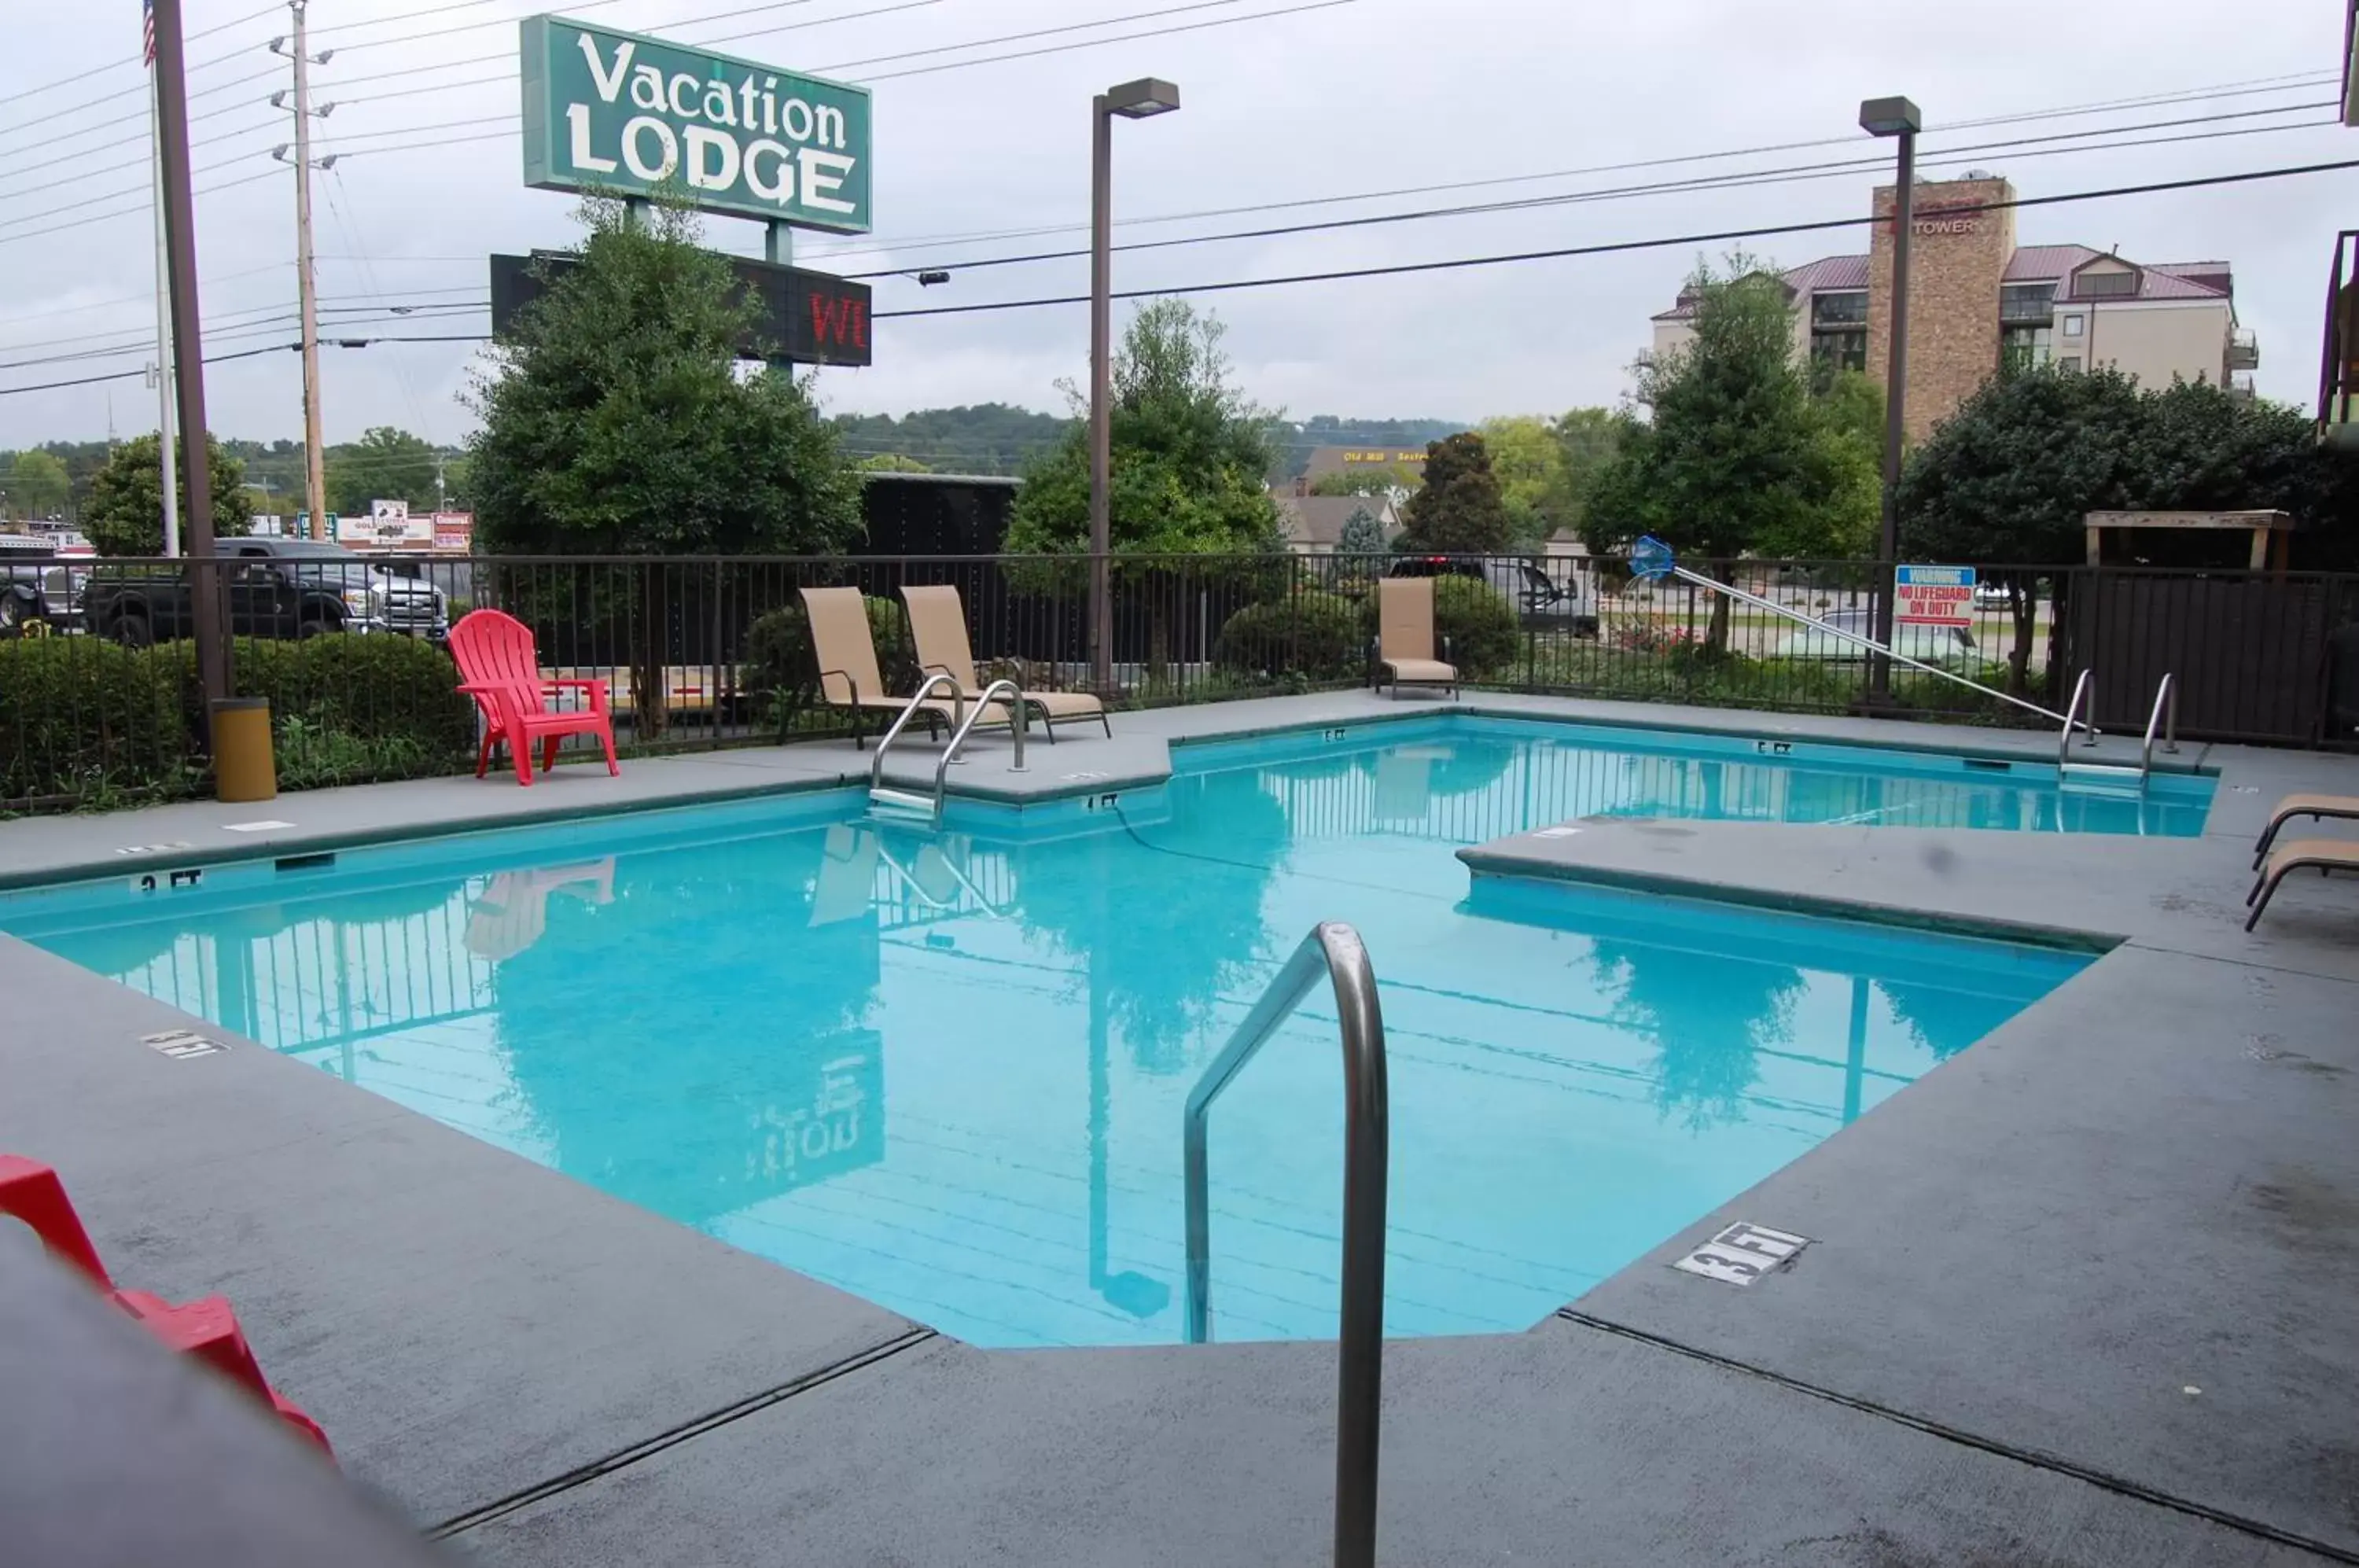 Swimming Pool in Vacation Lodge